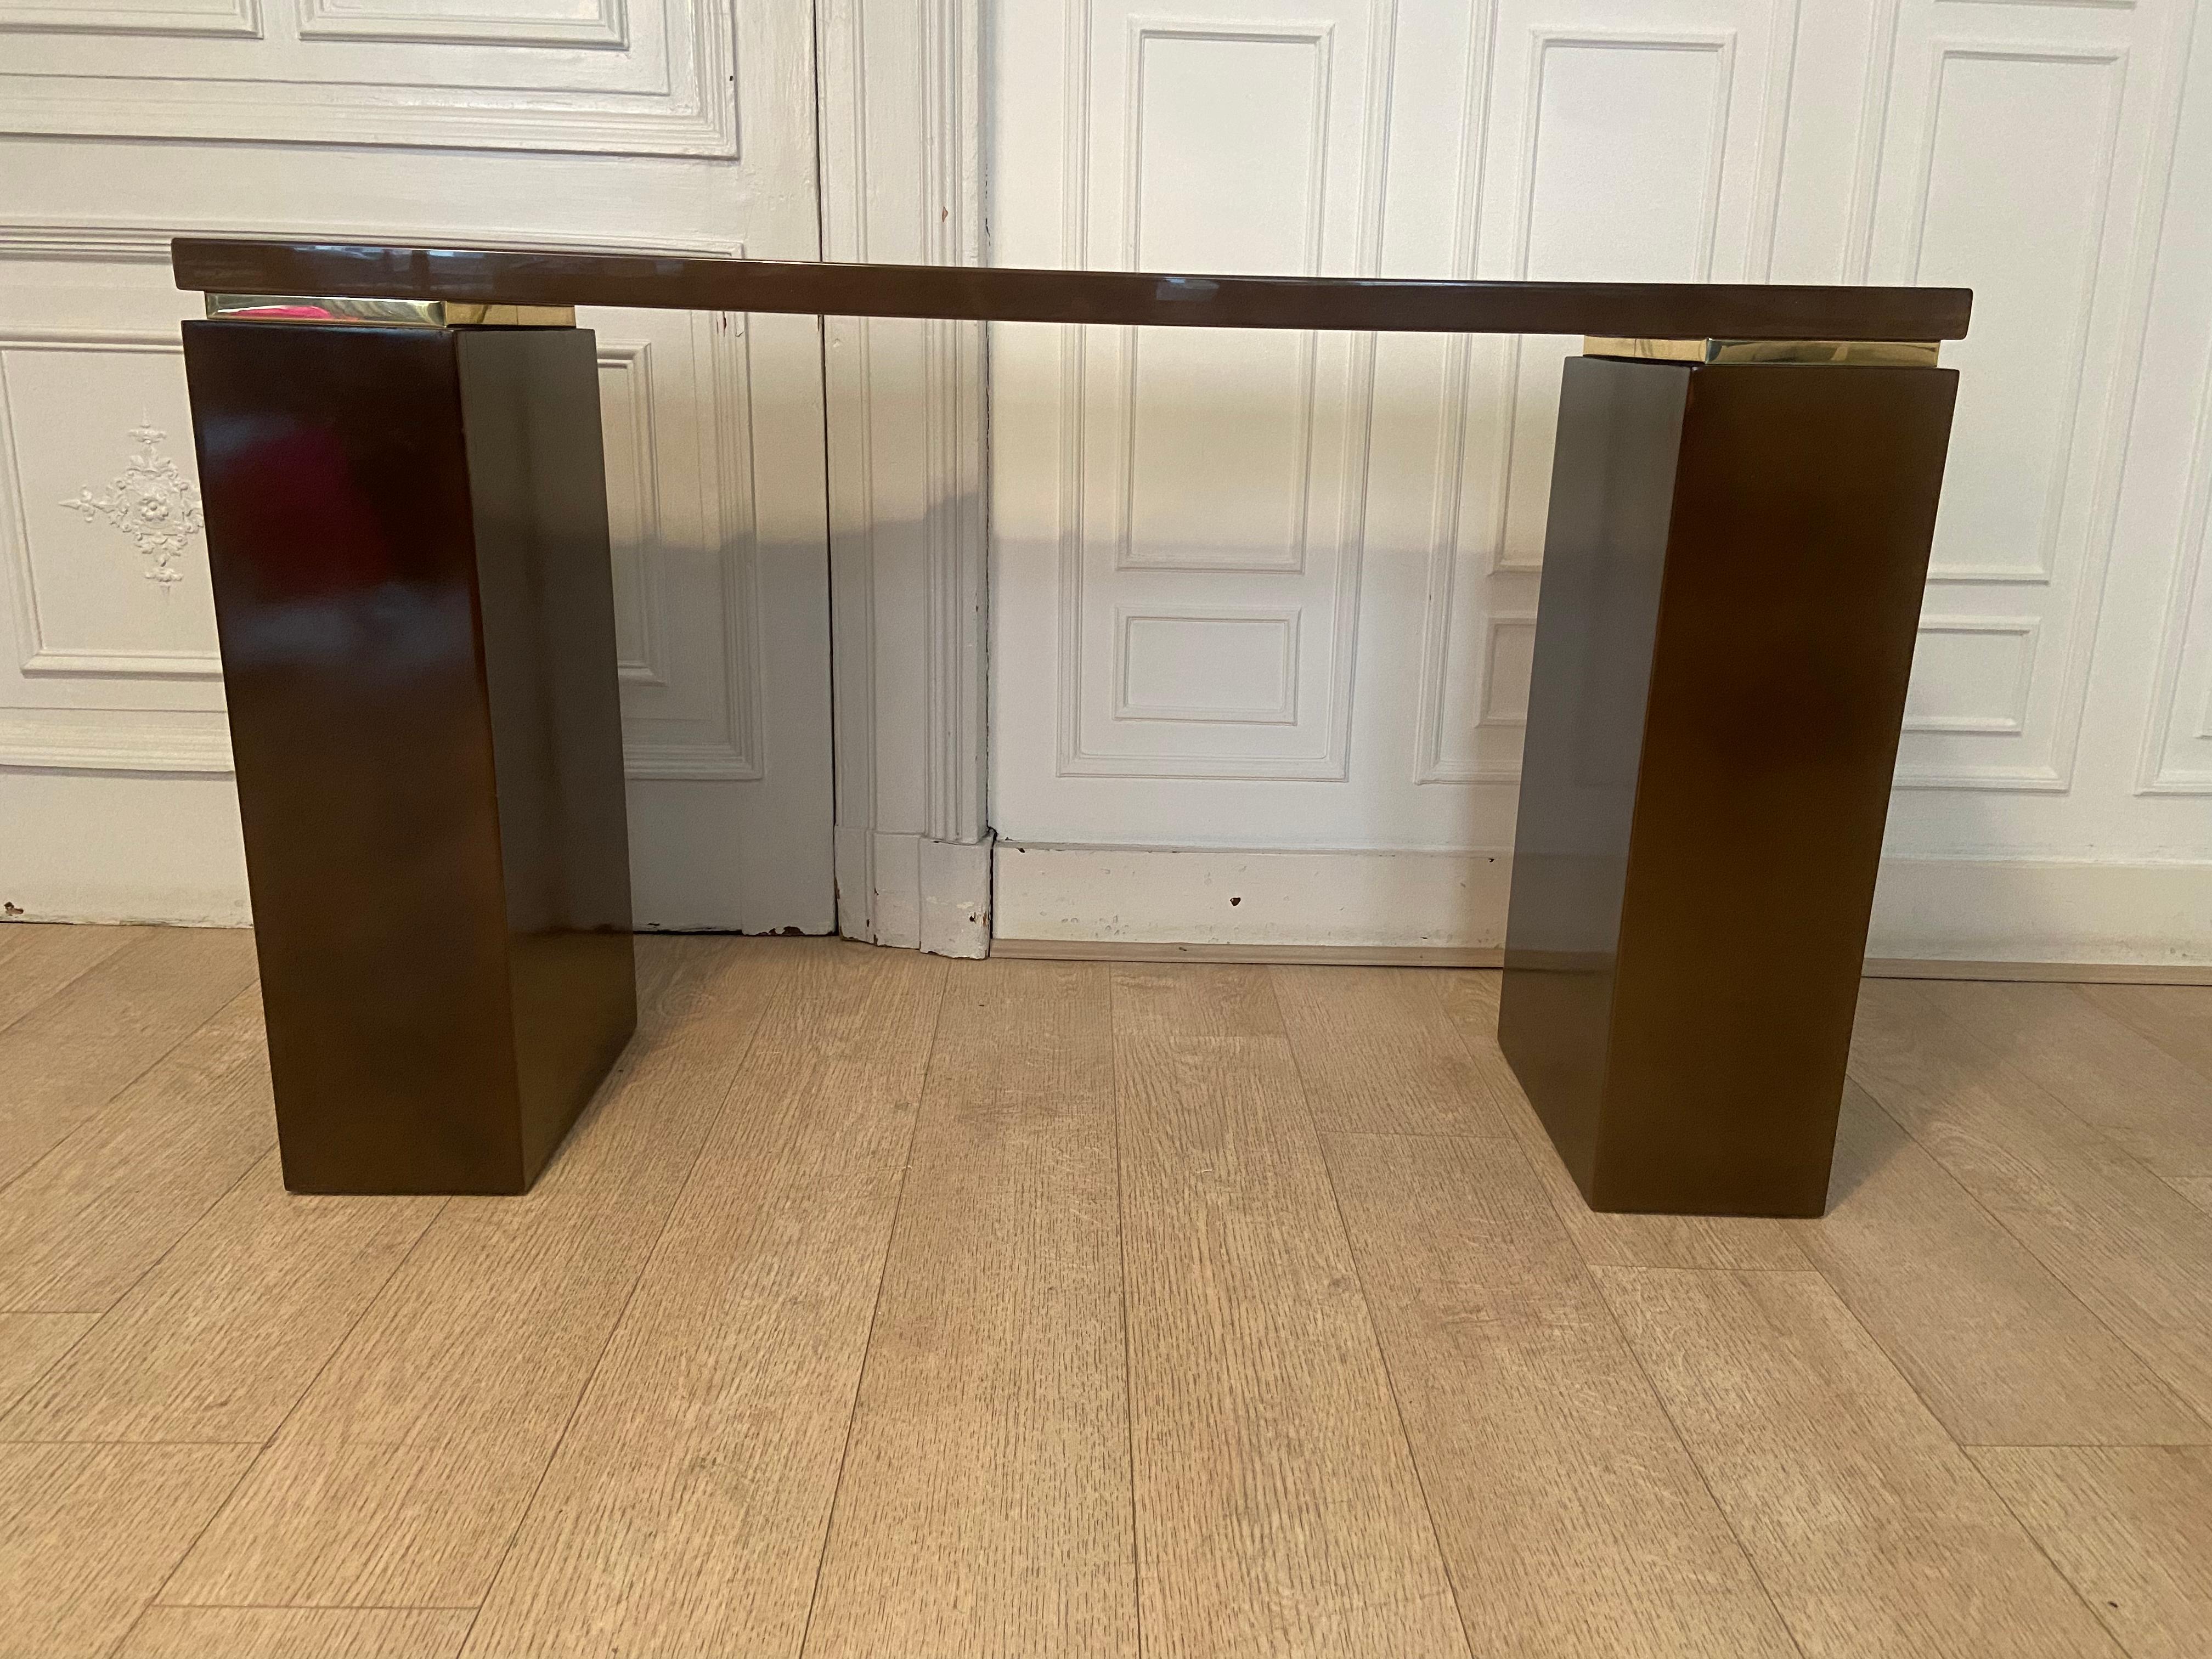 Roche bobois console produced in the 70s. Brown lacquer with moiré effects and gold ornaments.
 